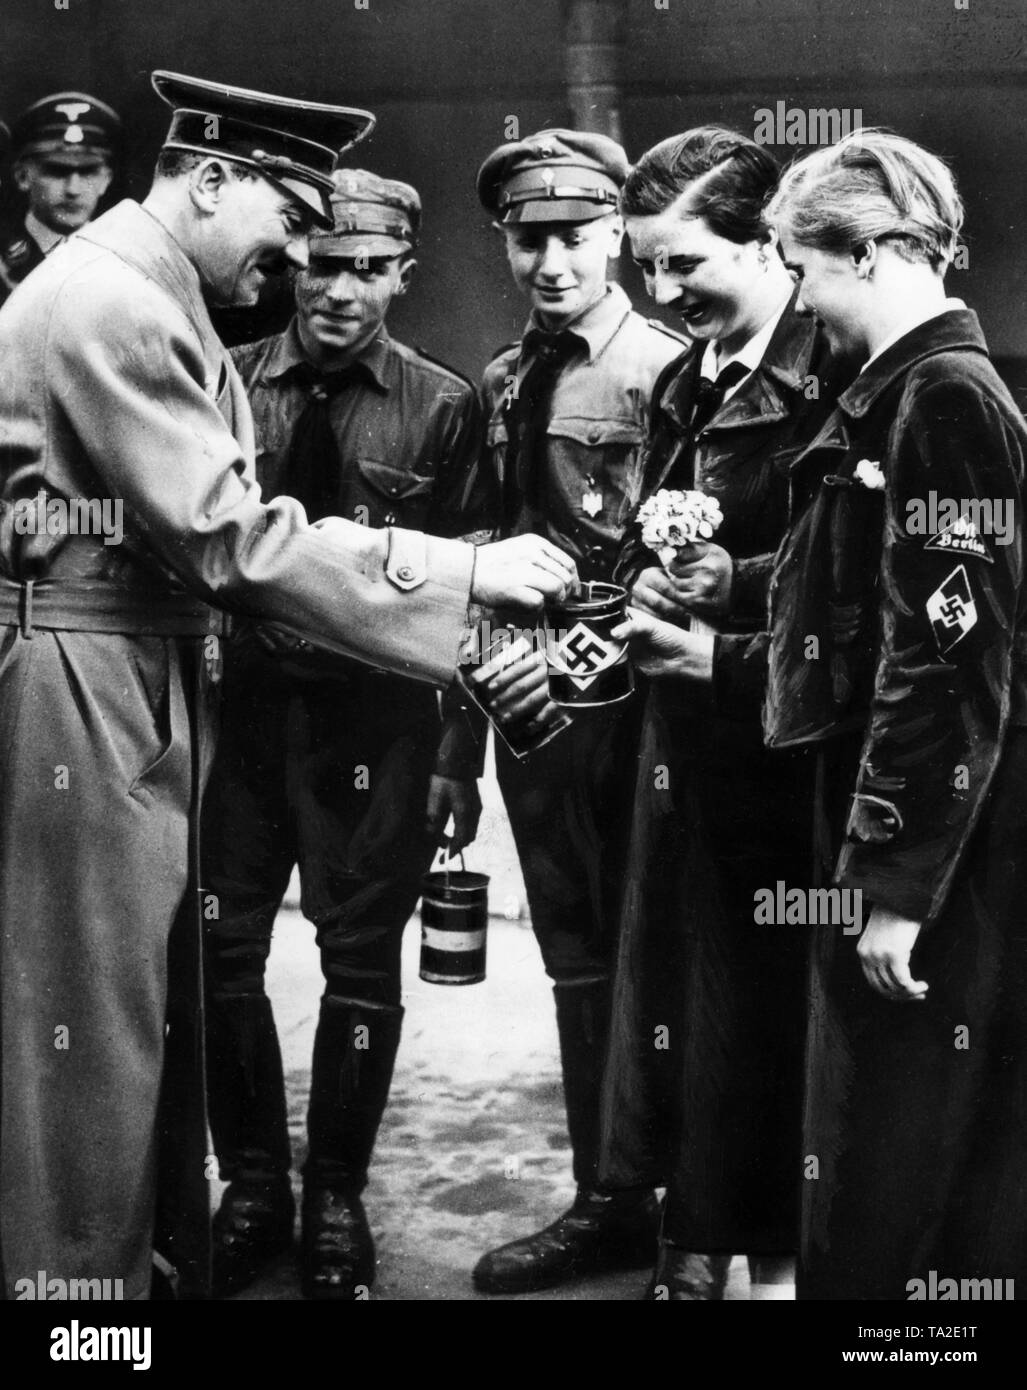 Adolf Hitler (left) buys flowers from HJ and BDM members, who are collecting money for youth hostels. The picture was made in the summer of 1936 before the Reichskanzlei. Stock Photo